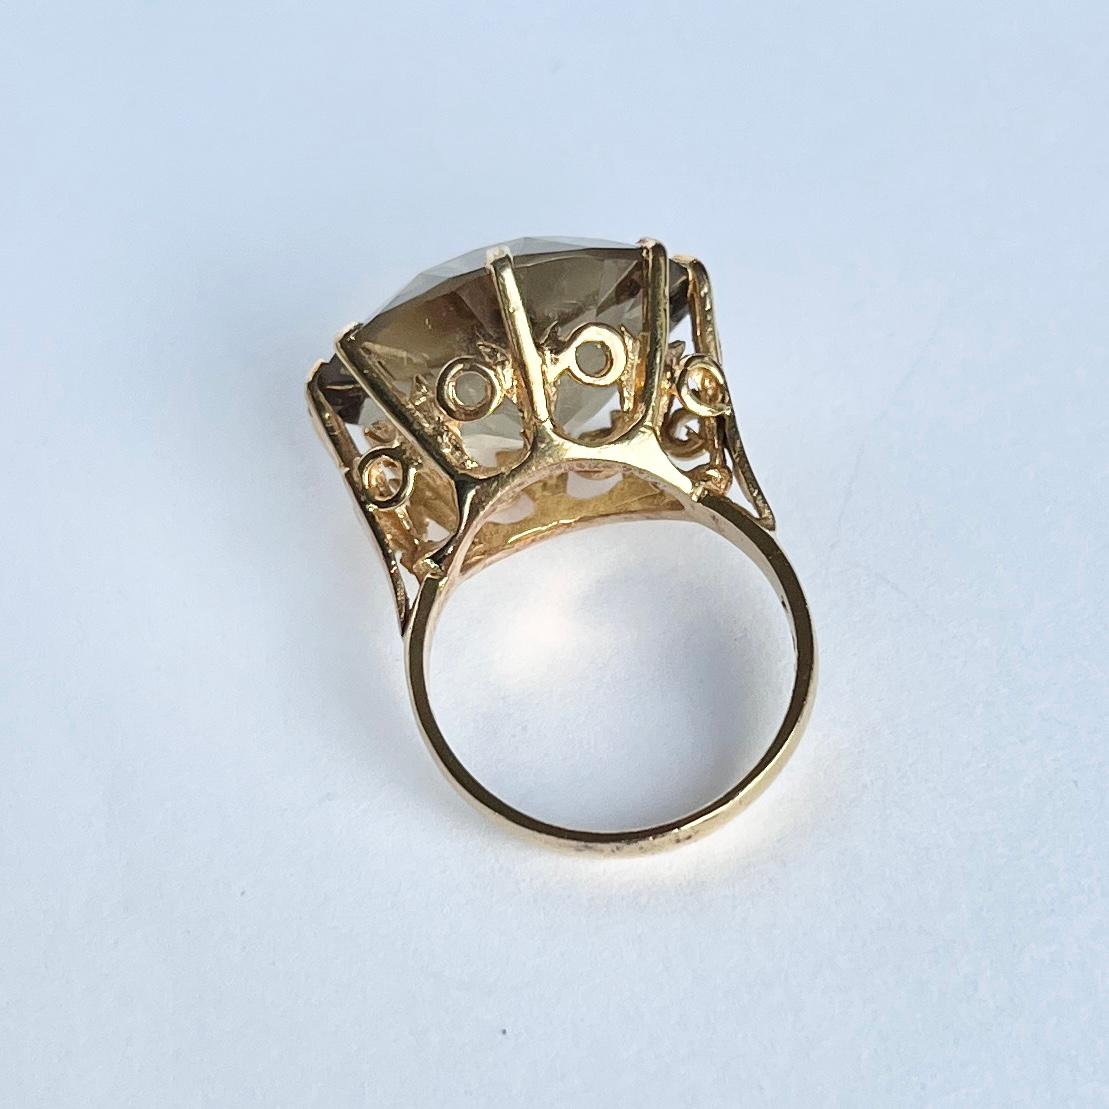 Vintage Citrine and 9 Carat Gold Cocktail Ring In Good Condition For Sale In Chipping Campden, GB